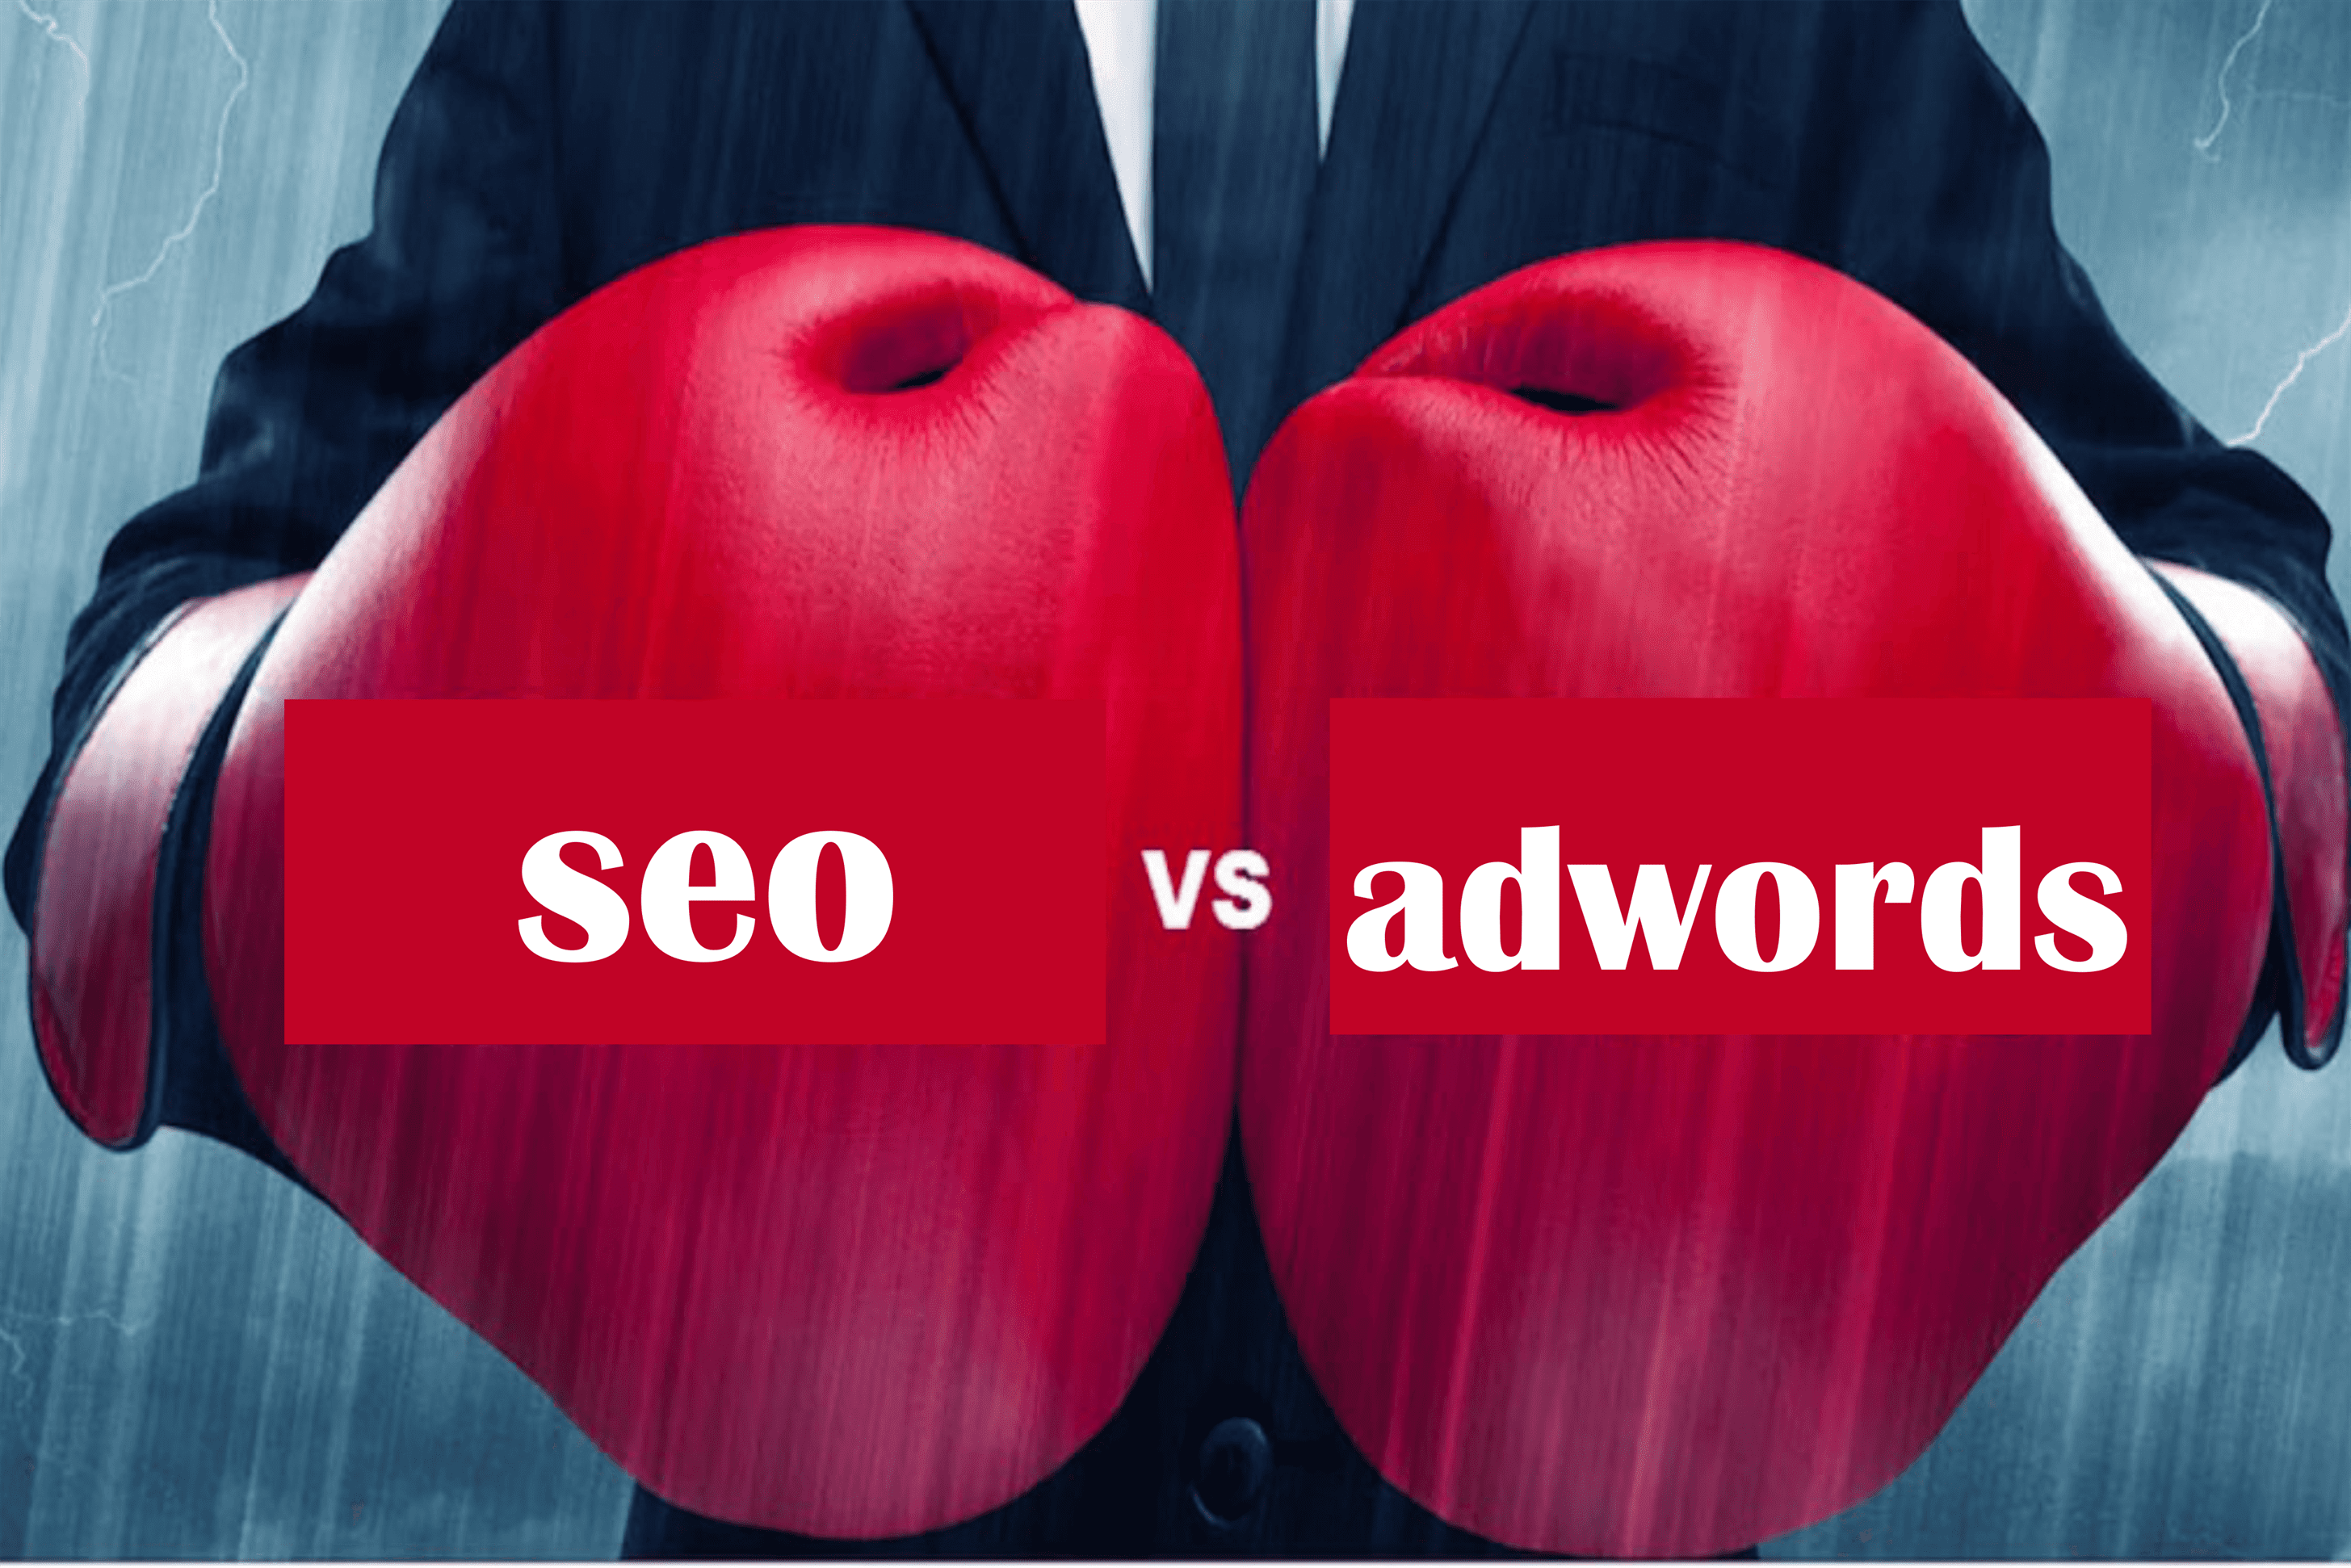 Online promotion - Adwords or SEO?